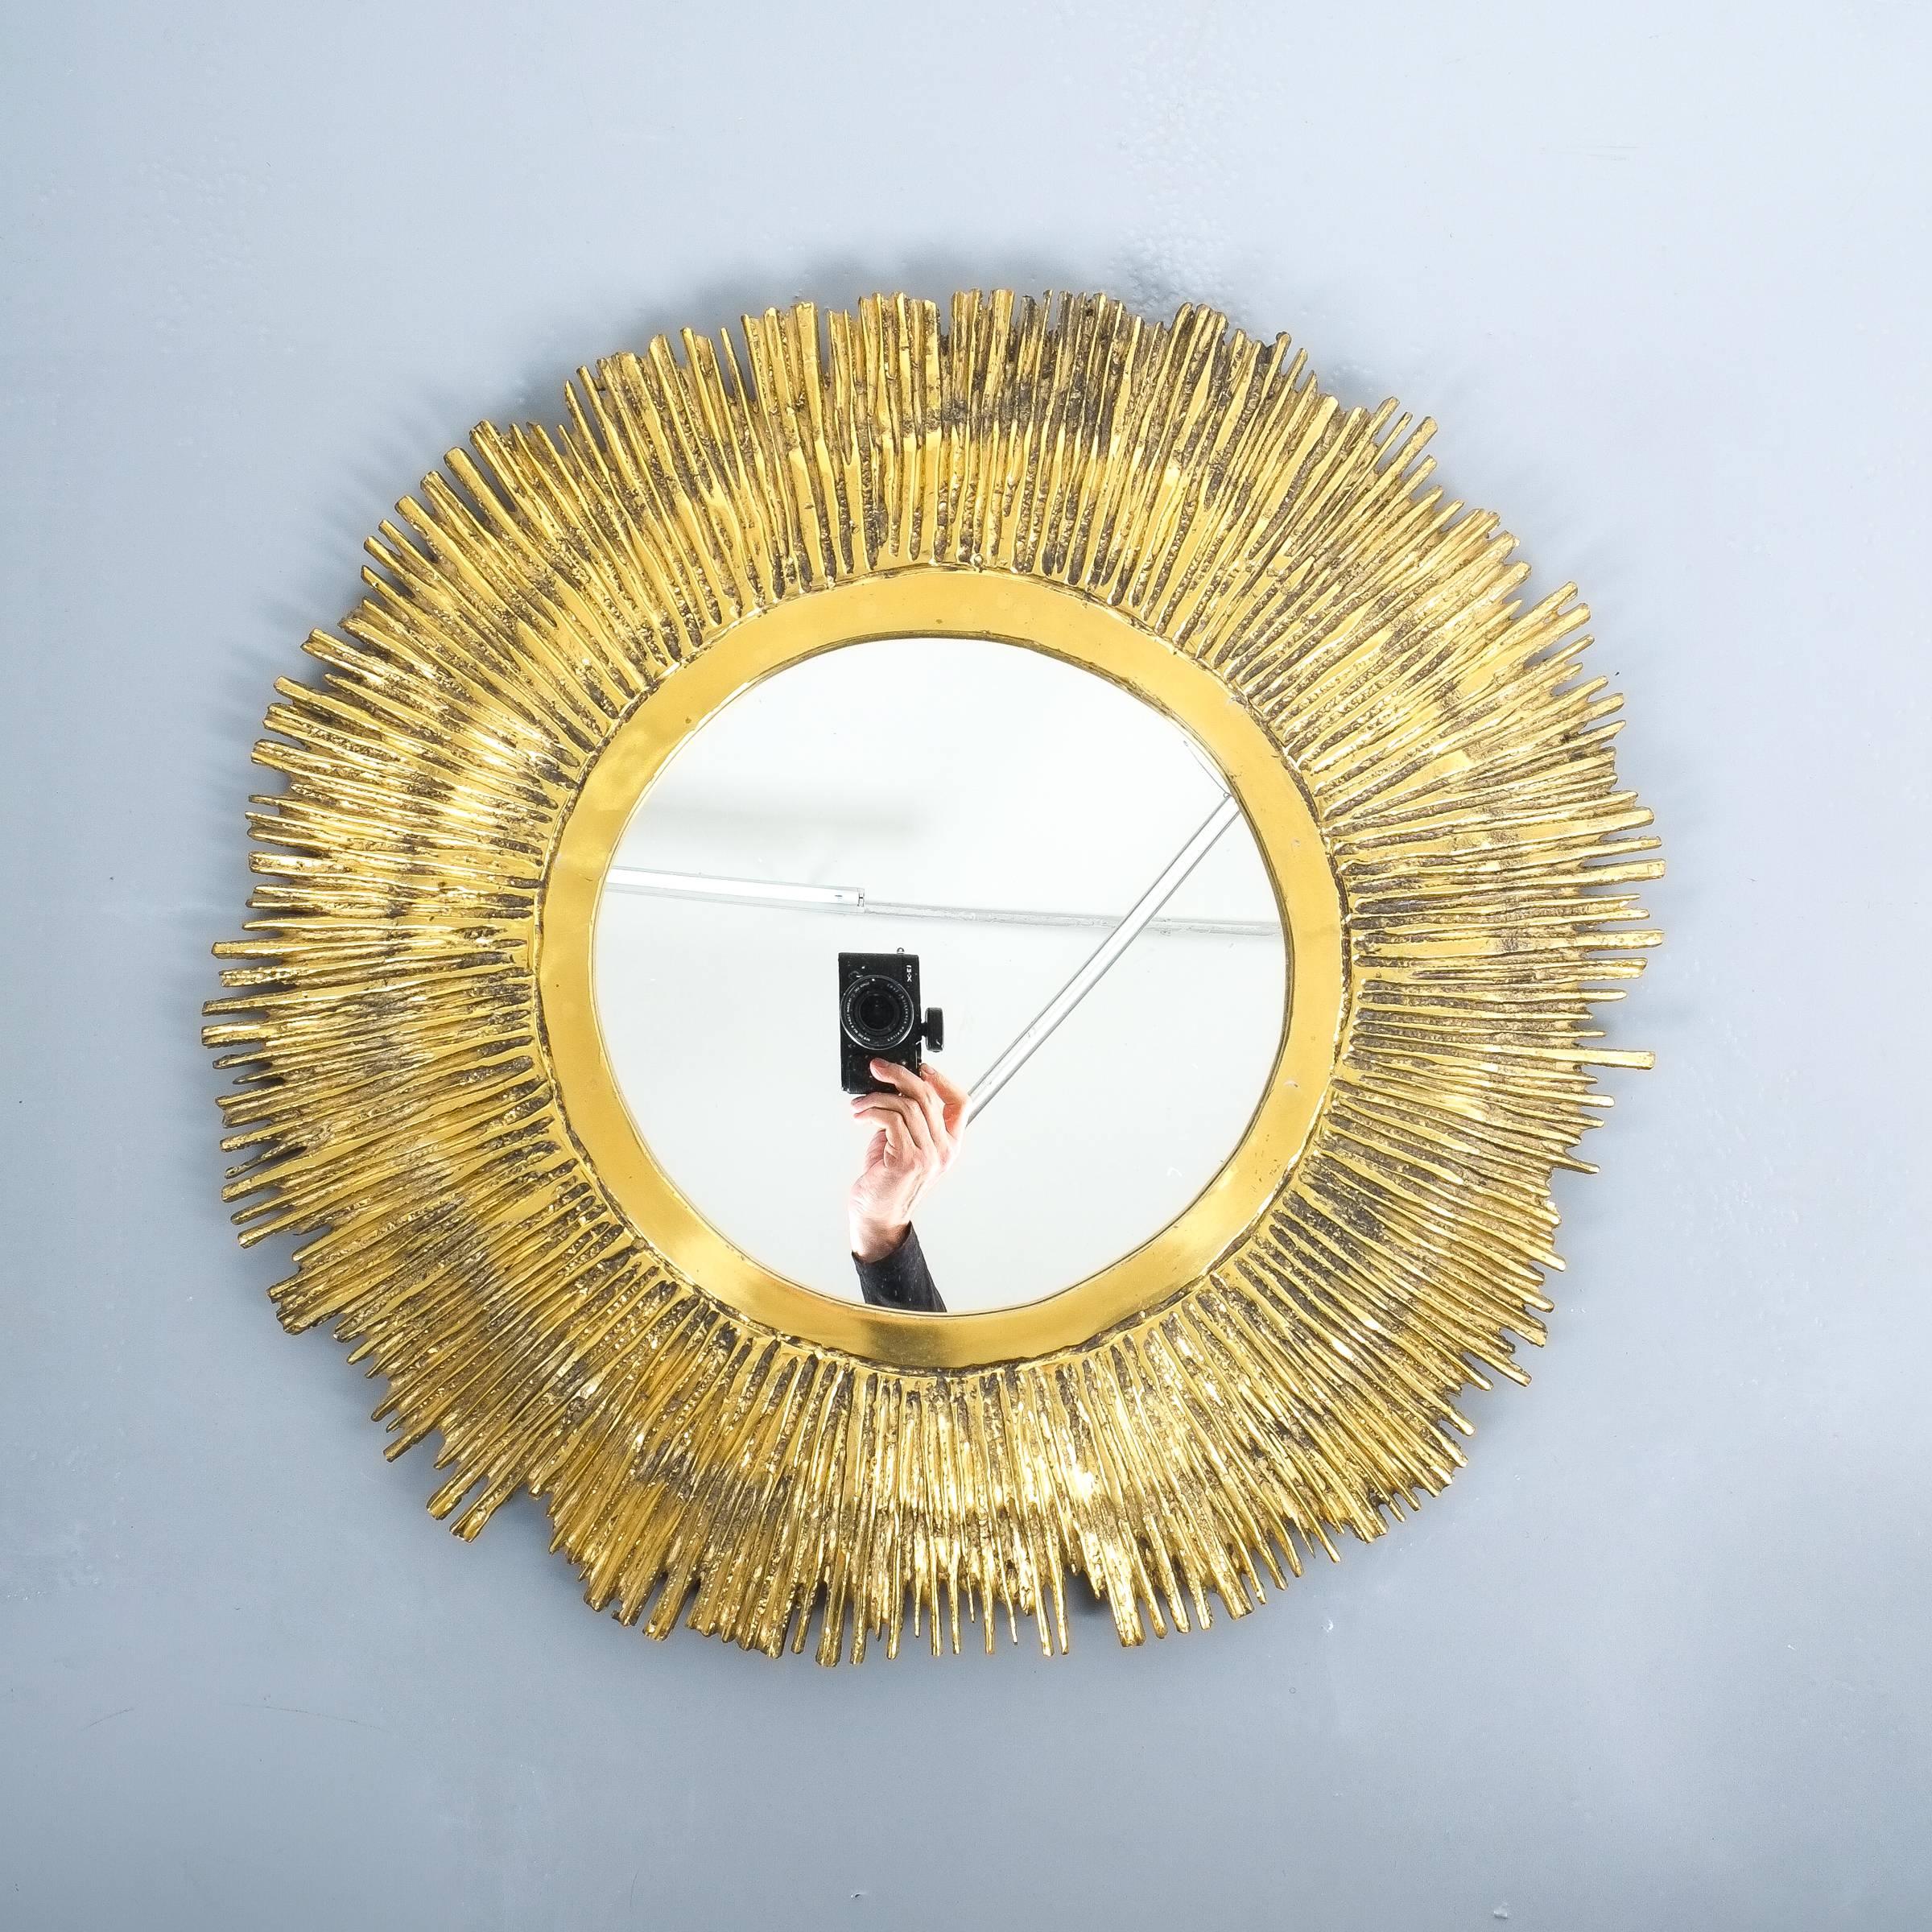 Impressive 24 inch solid brass mirror, in the style of Curtis Jere, circa 1955 featuring a handmade heavy and solid cast brass frame with a 11.8 inch mirror inlay. The mirror weighs 8-10kg approximate. Very good condition.